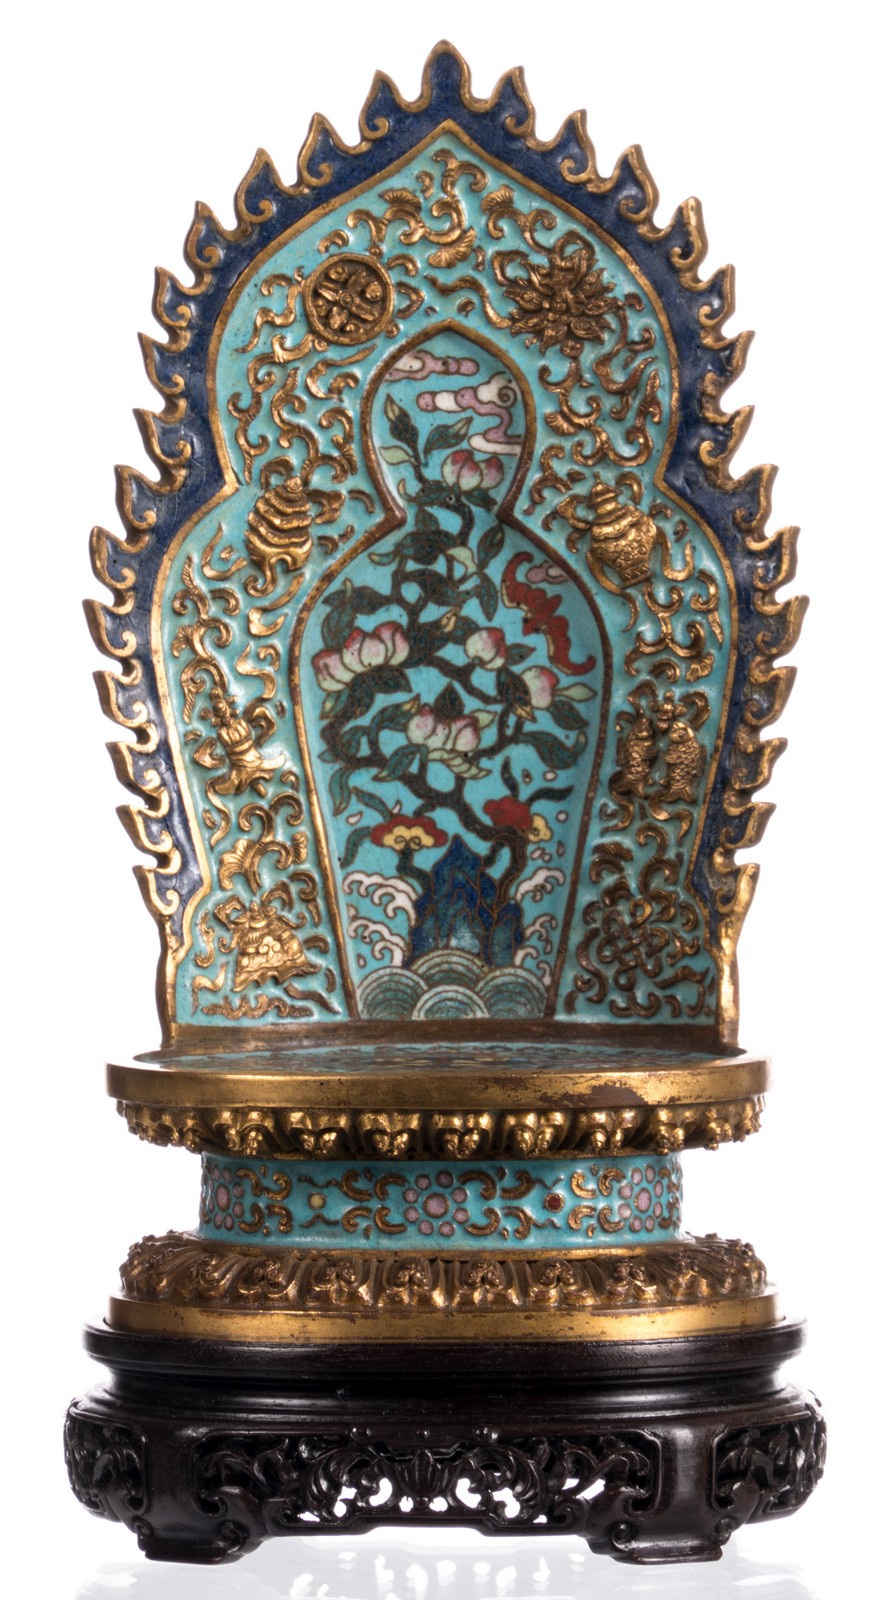 A Chinese gilt bronze cloisonné domestic altar with an aureole, floral and relief decorated, on a - Image 2 of 10